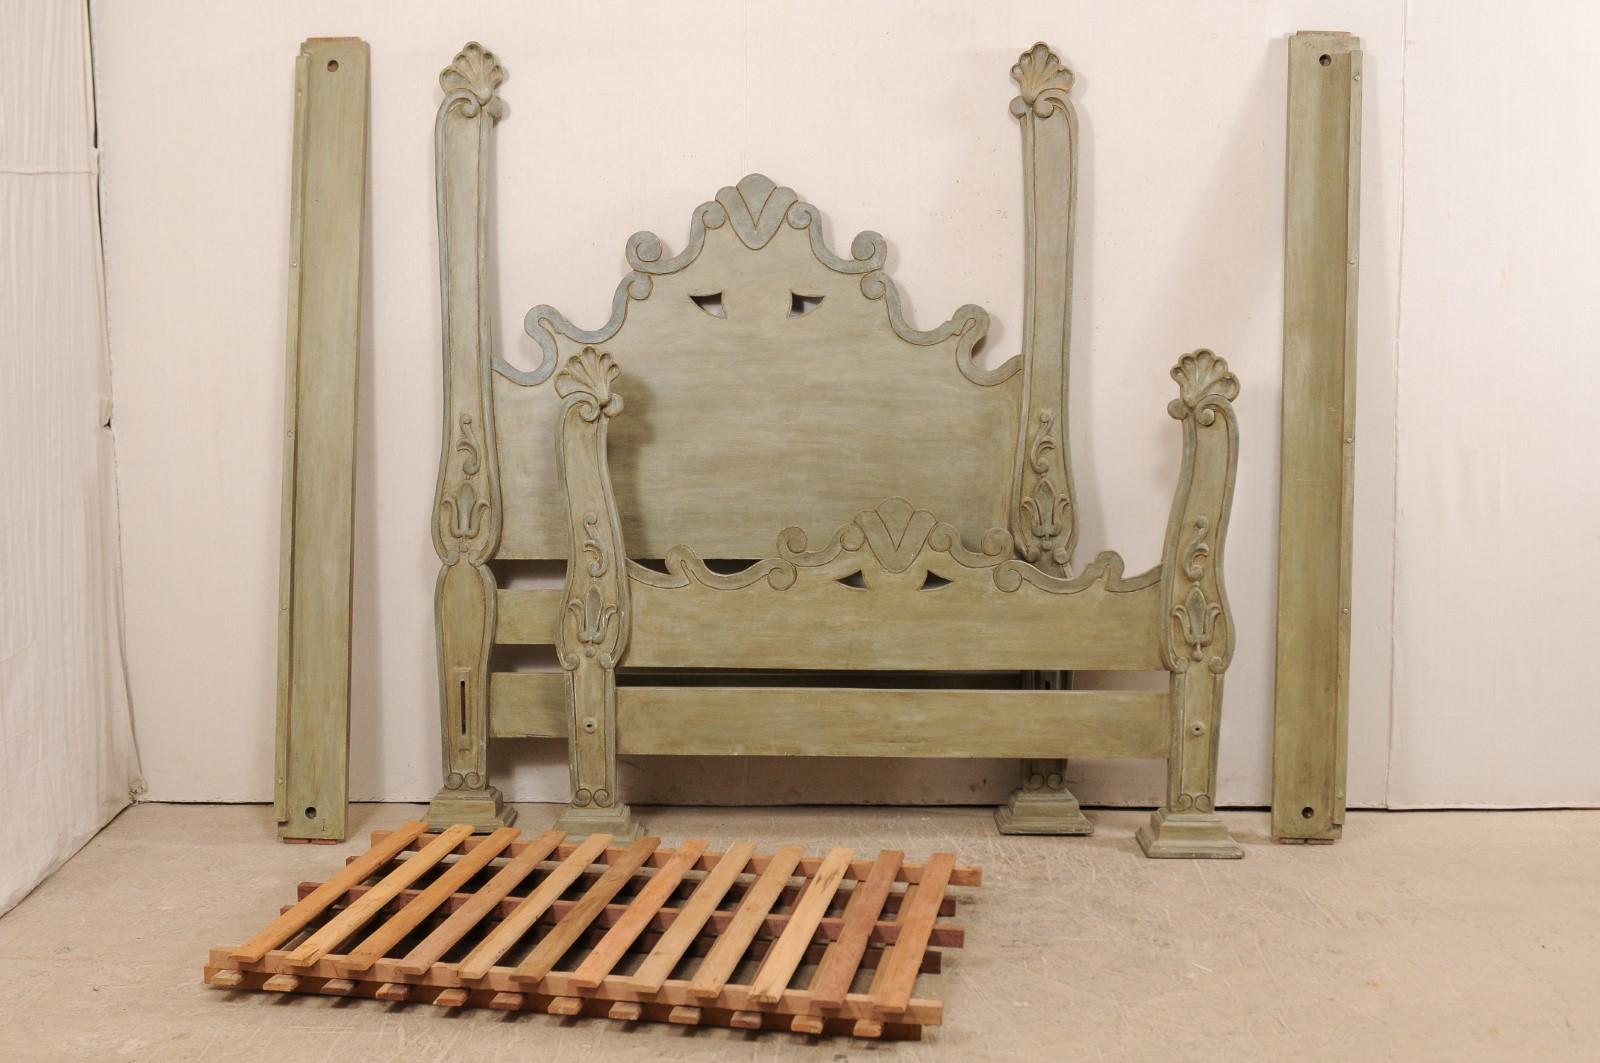 Unique Carved and Painted Wood Queen Bed Frame from Brazil 1